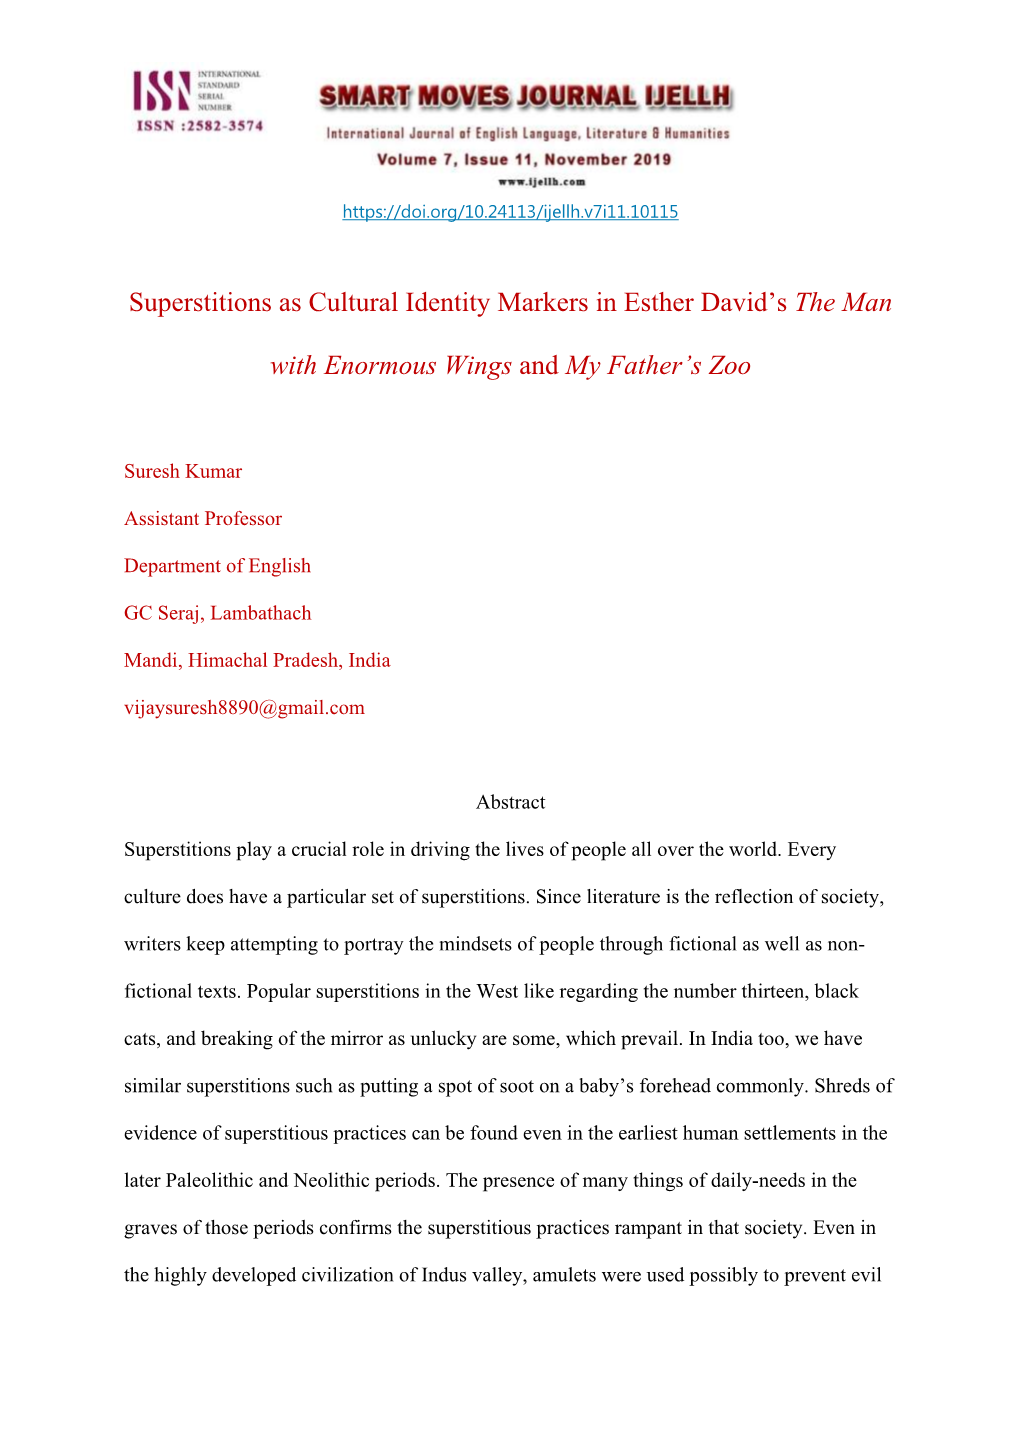 Superstitions As Cultural Identity Markers in Esther David's the Man with Enormous Wings and My Father's